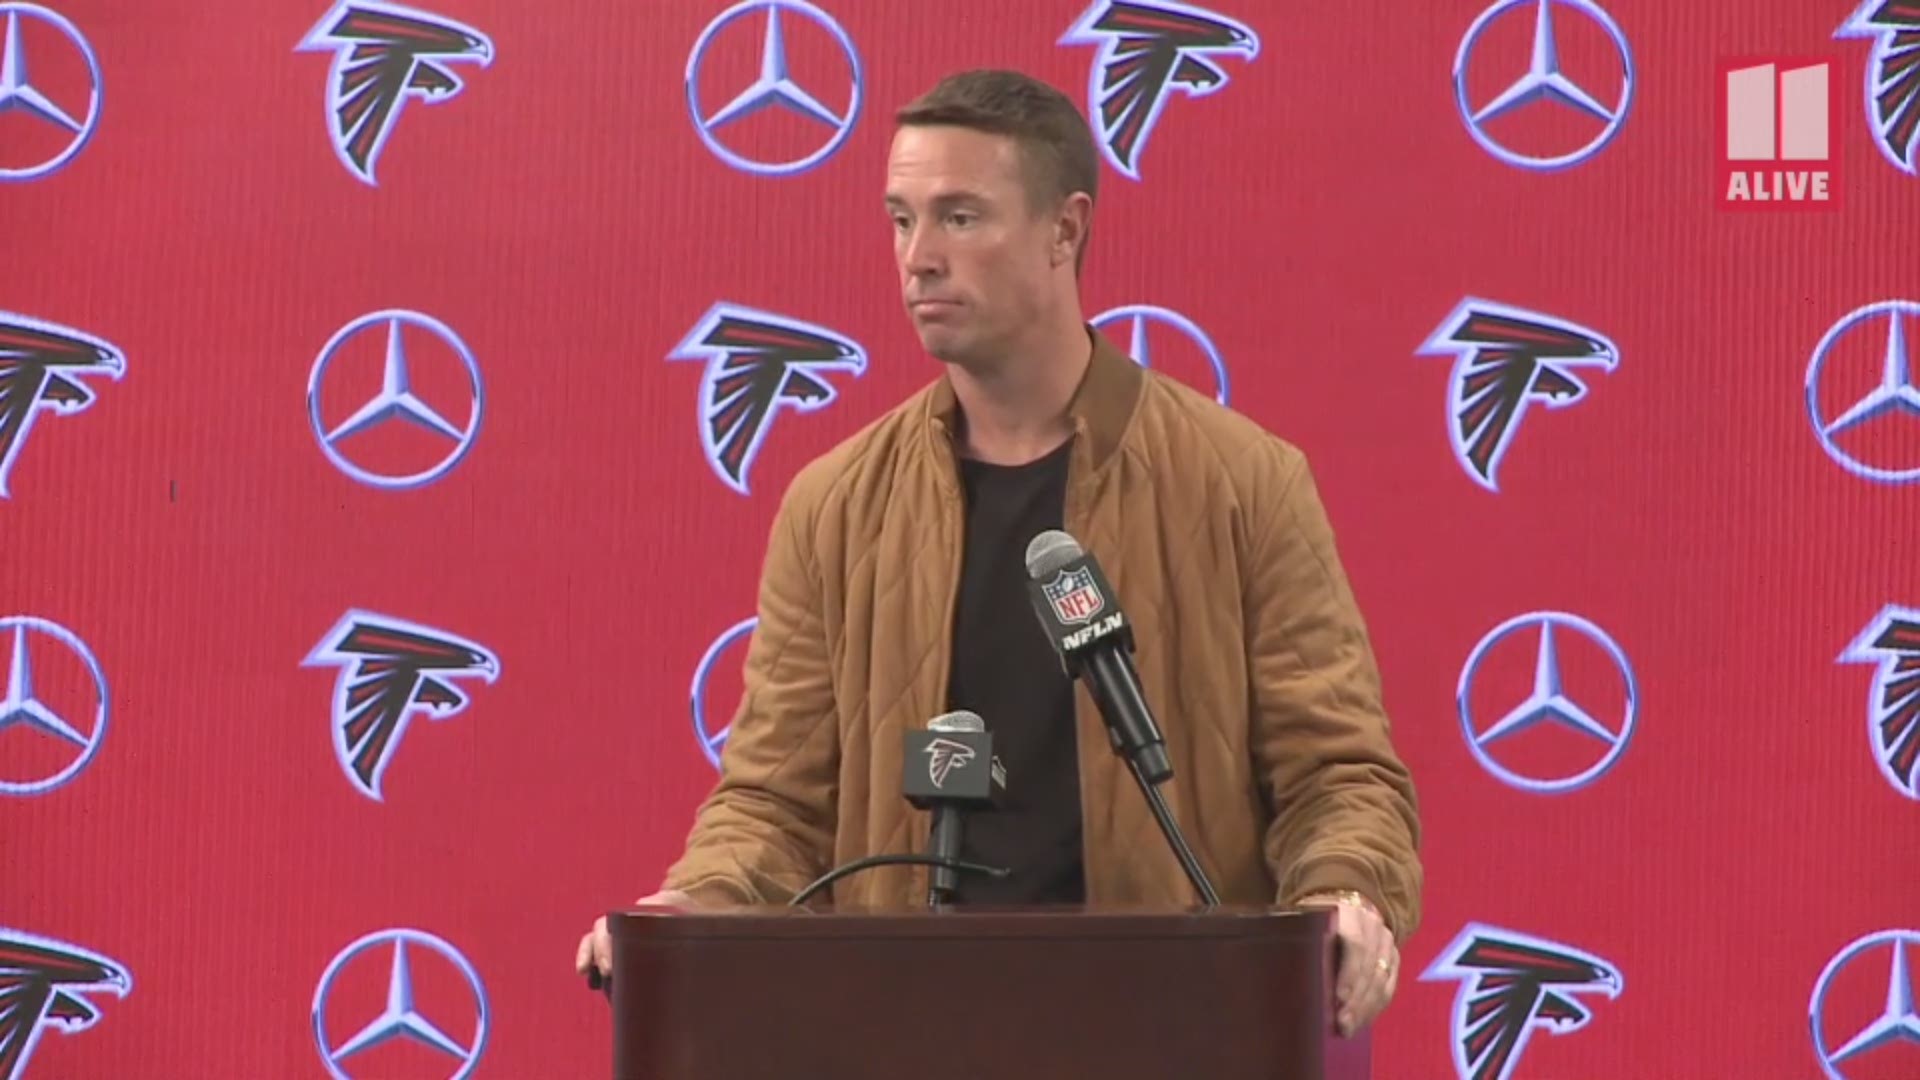 The Falcons' quarterback tackle spoke to 11Alive Sports in the locker room after the team's loss to Tampa Bay, Sunday.